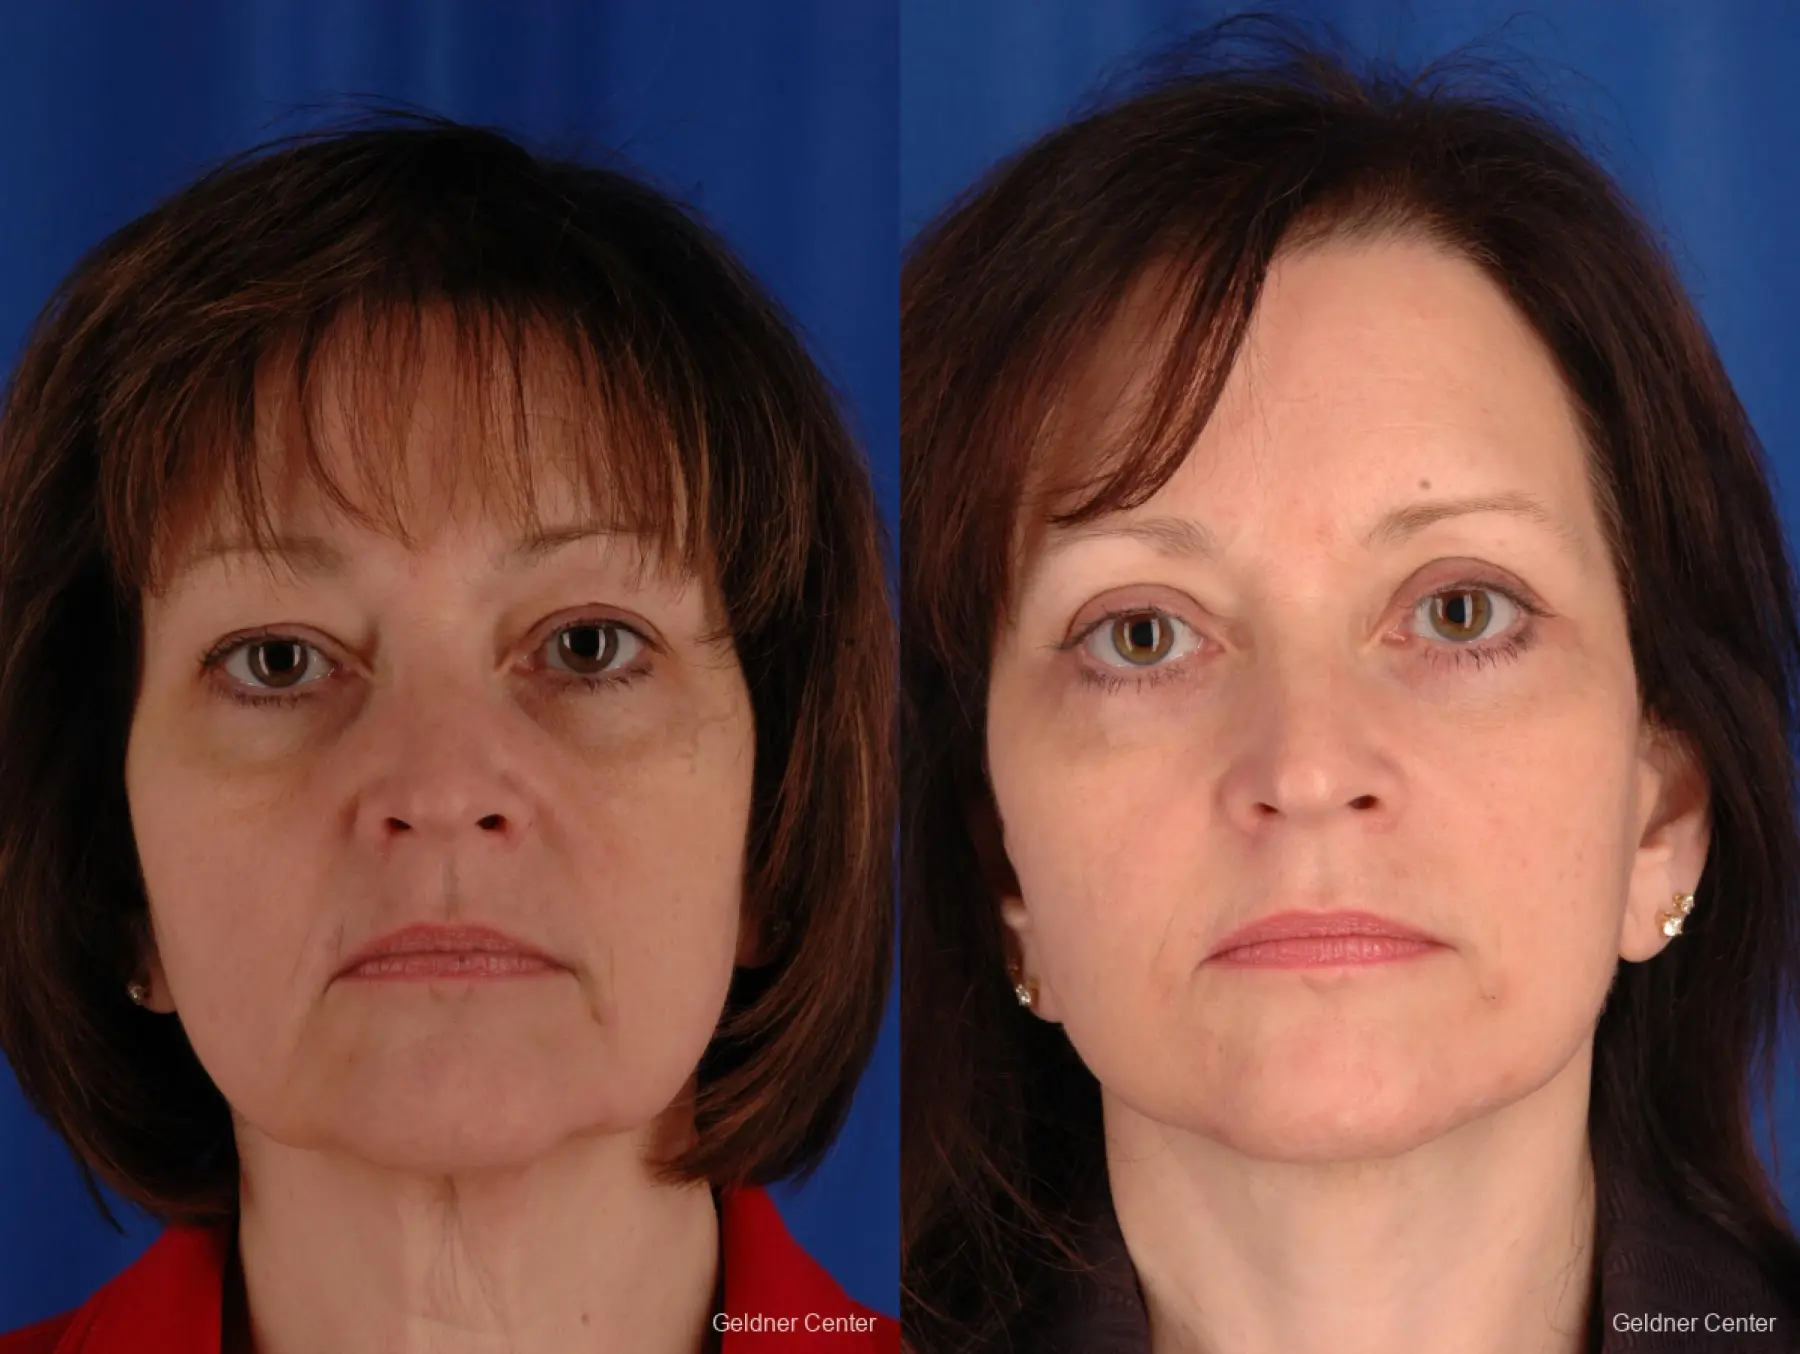 Neck Lift: Patient 2 - Before and After 1